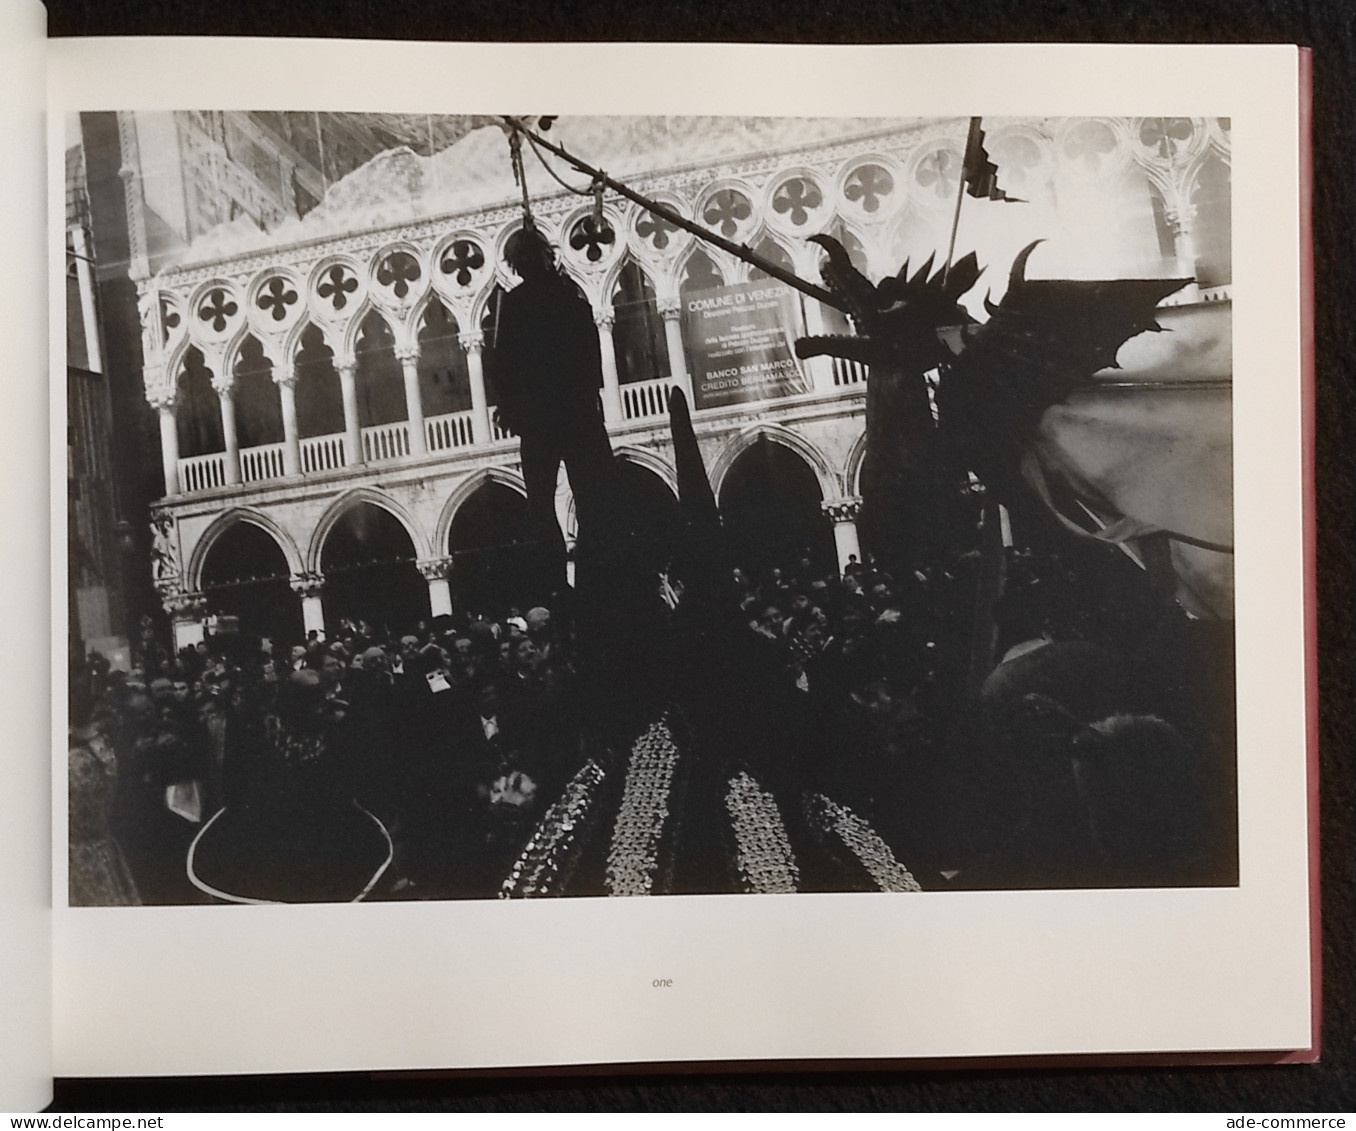 Venice-Carnival Unmasked - Pericles Boutos - Charta - 1998 - Foto